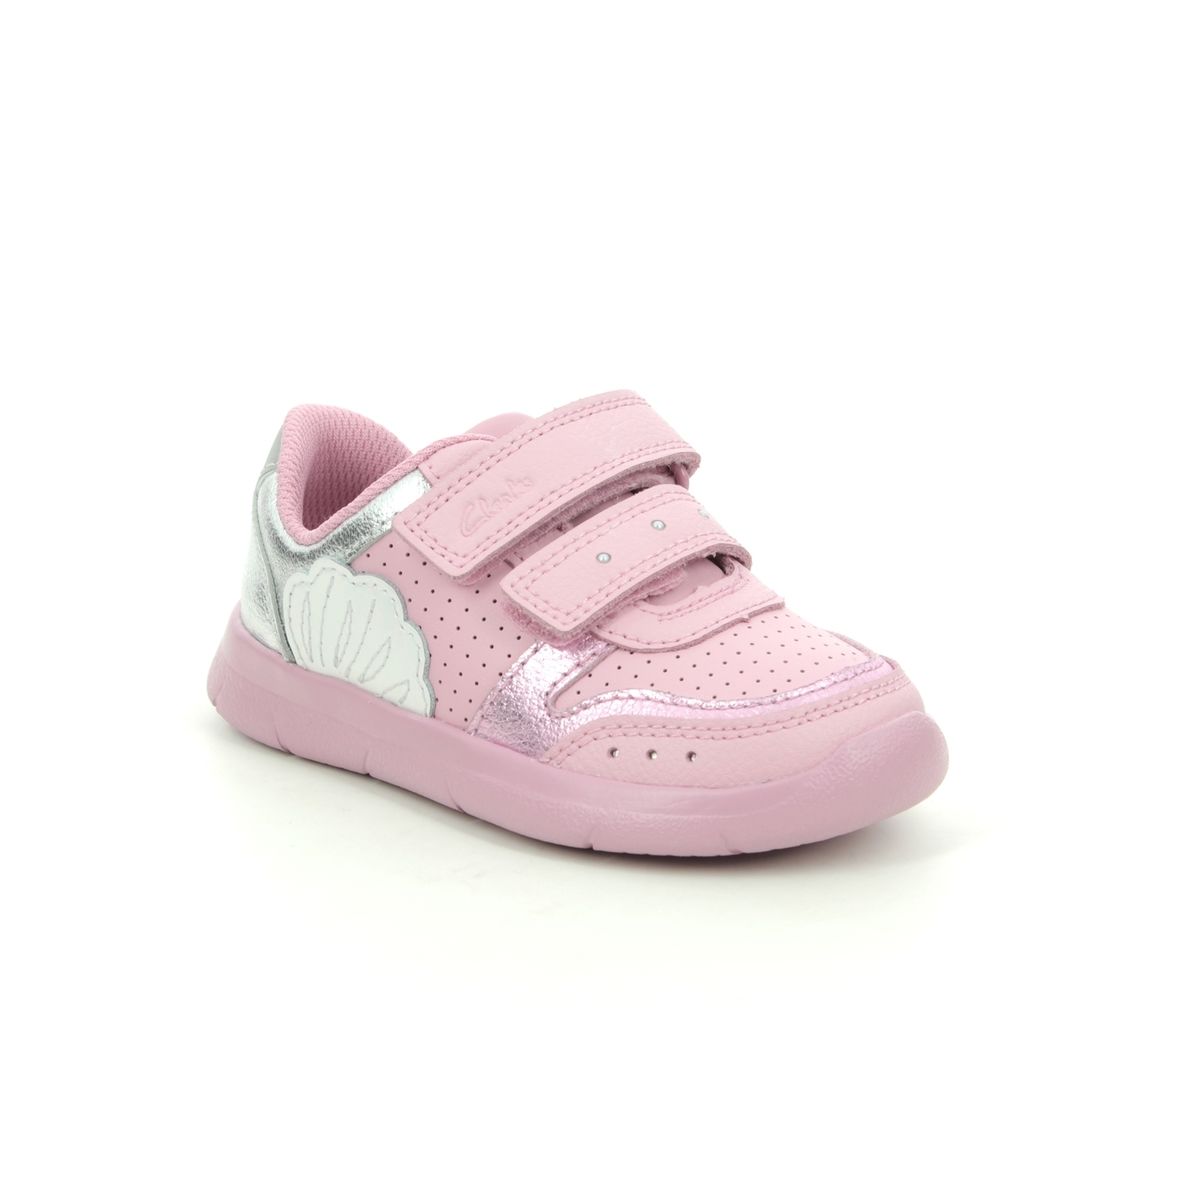 Clarks Ath Shell T Pink Leather Kids Toddler Girls Trainers 588096F In Size 9.5 In Plain Pink Leather F Width Fitting Regular Fit For kids